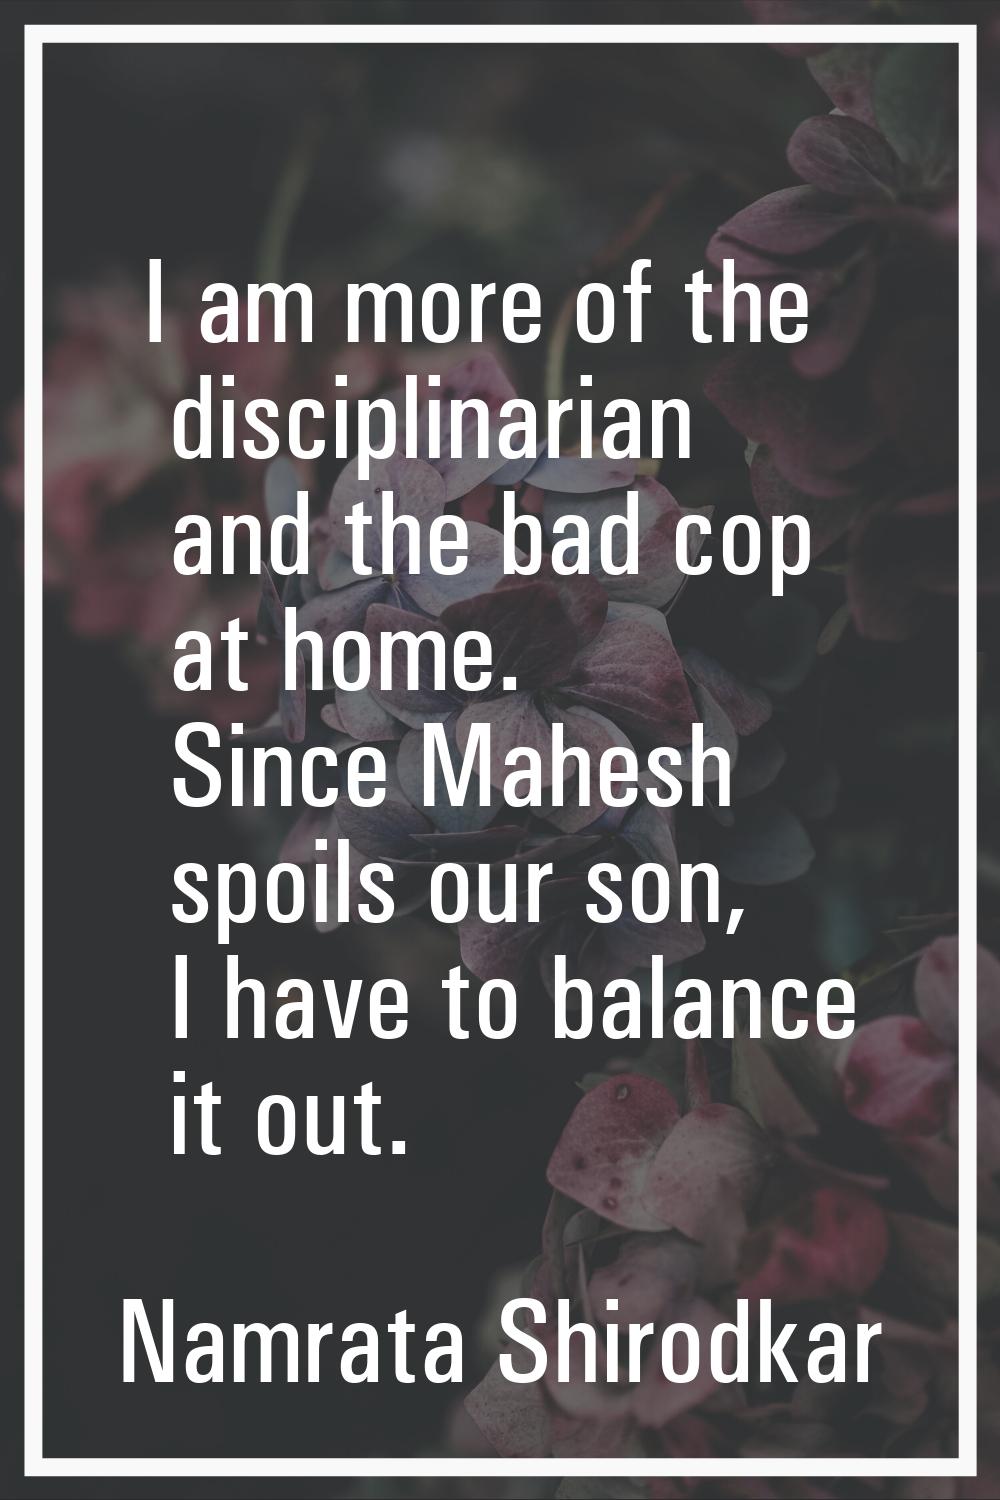 I am more of the disciplinarian and the bad cop at home. Since Mahesh spoils our son, I have to bal